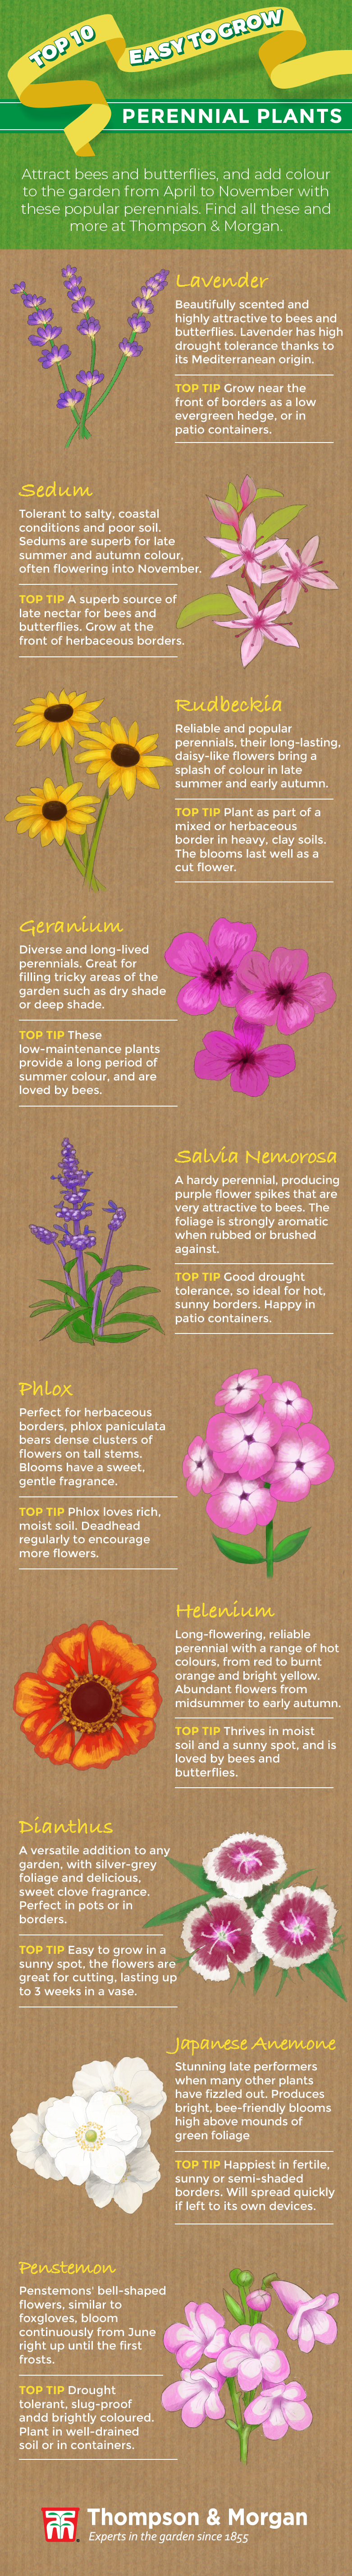 top ten easy perennials infographic from Thompson & Morgan